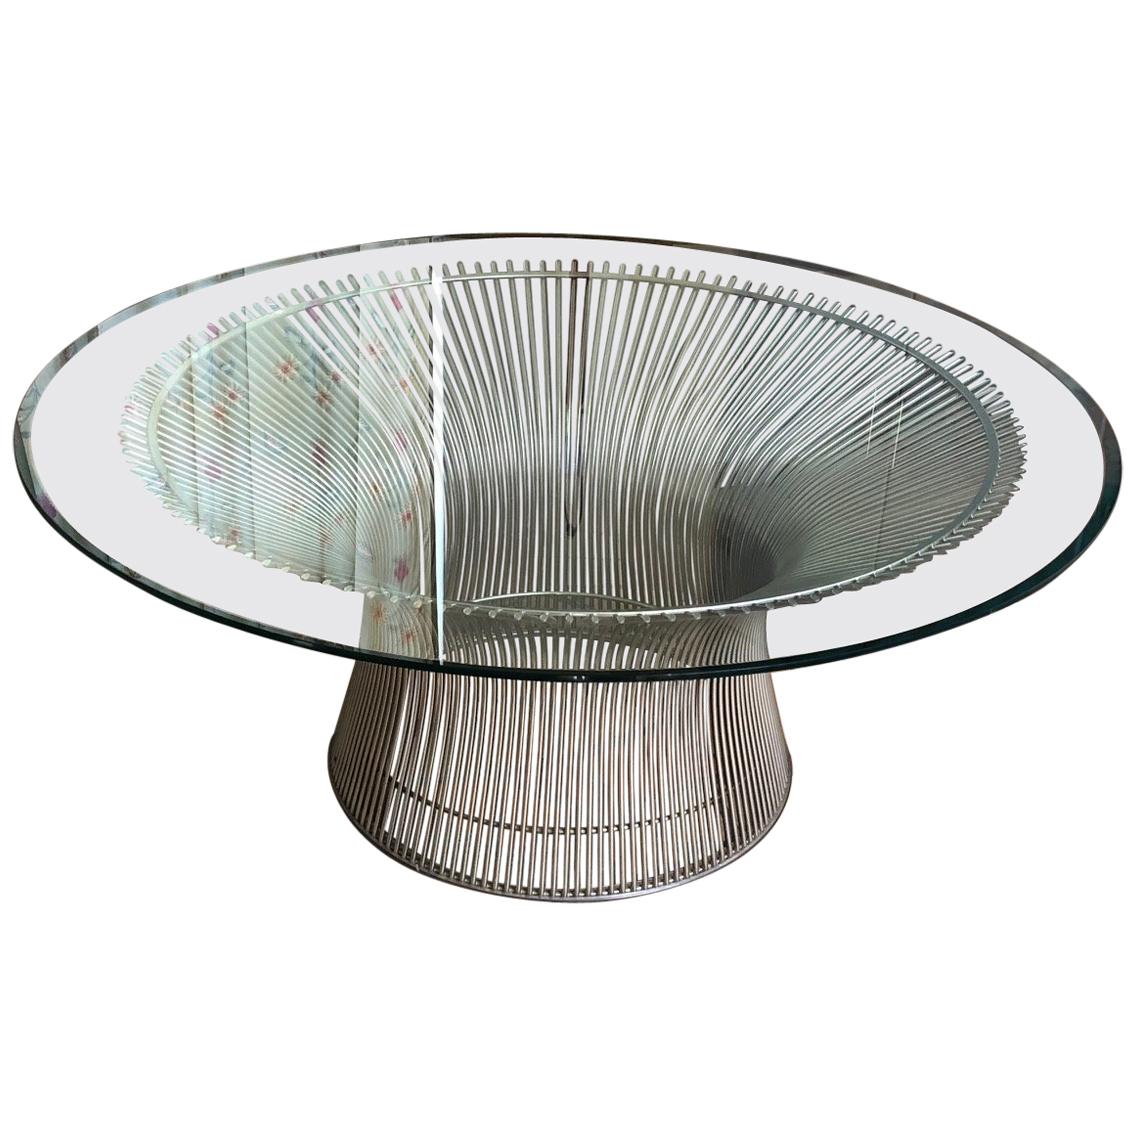 Warren Platner for Knoll Coffee Table, circa 1970s